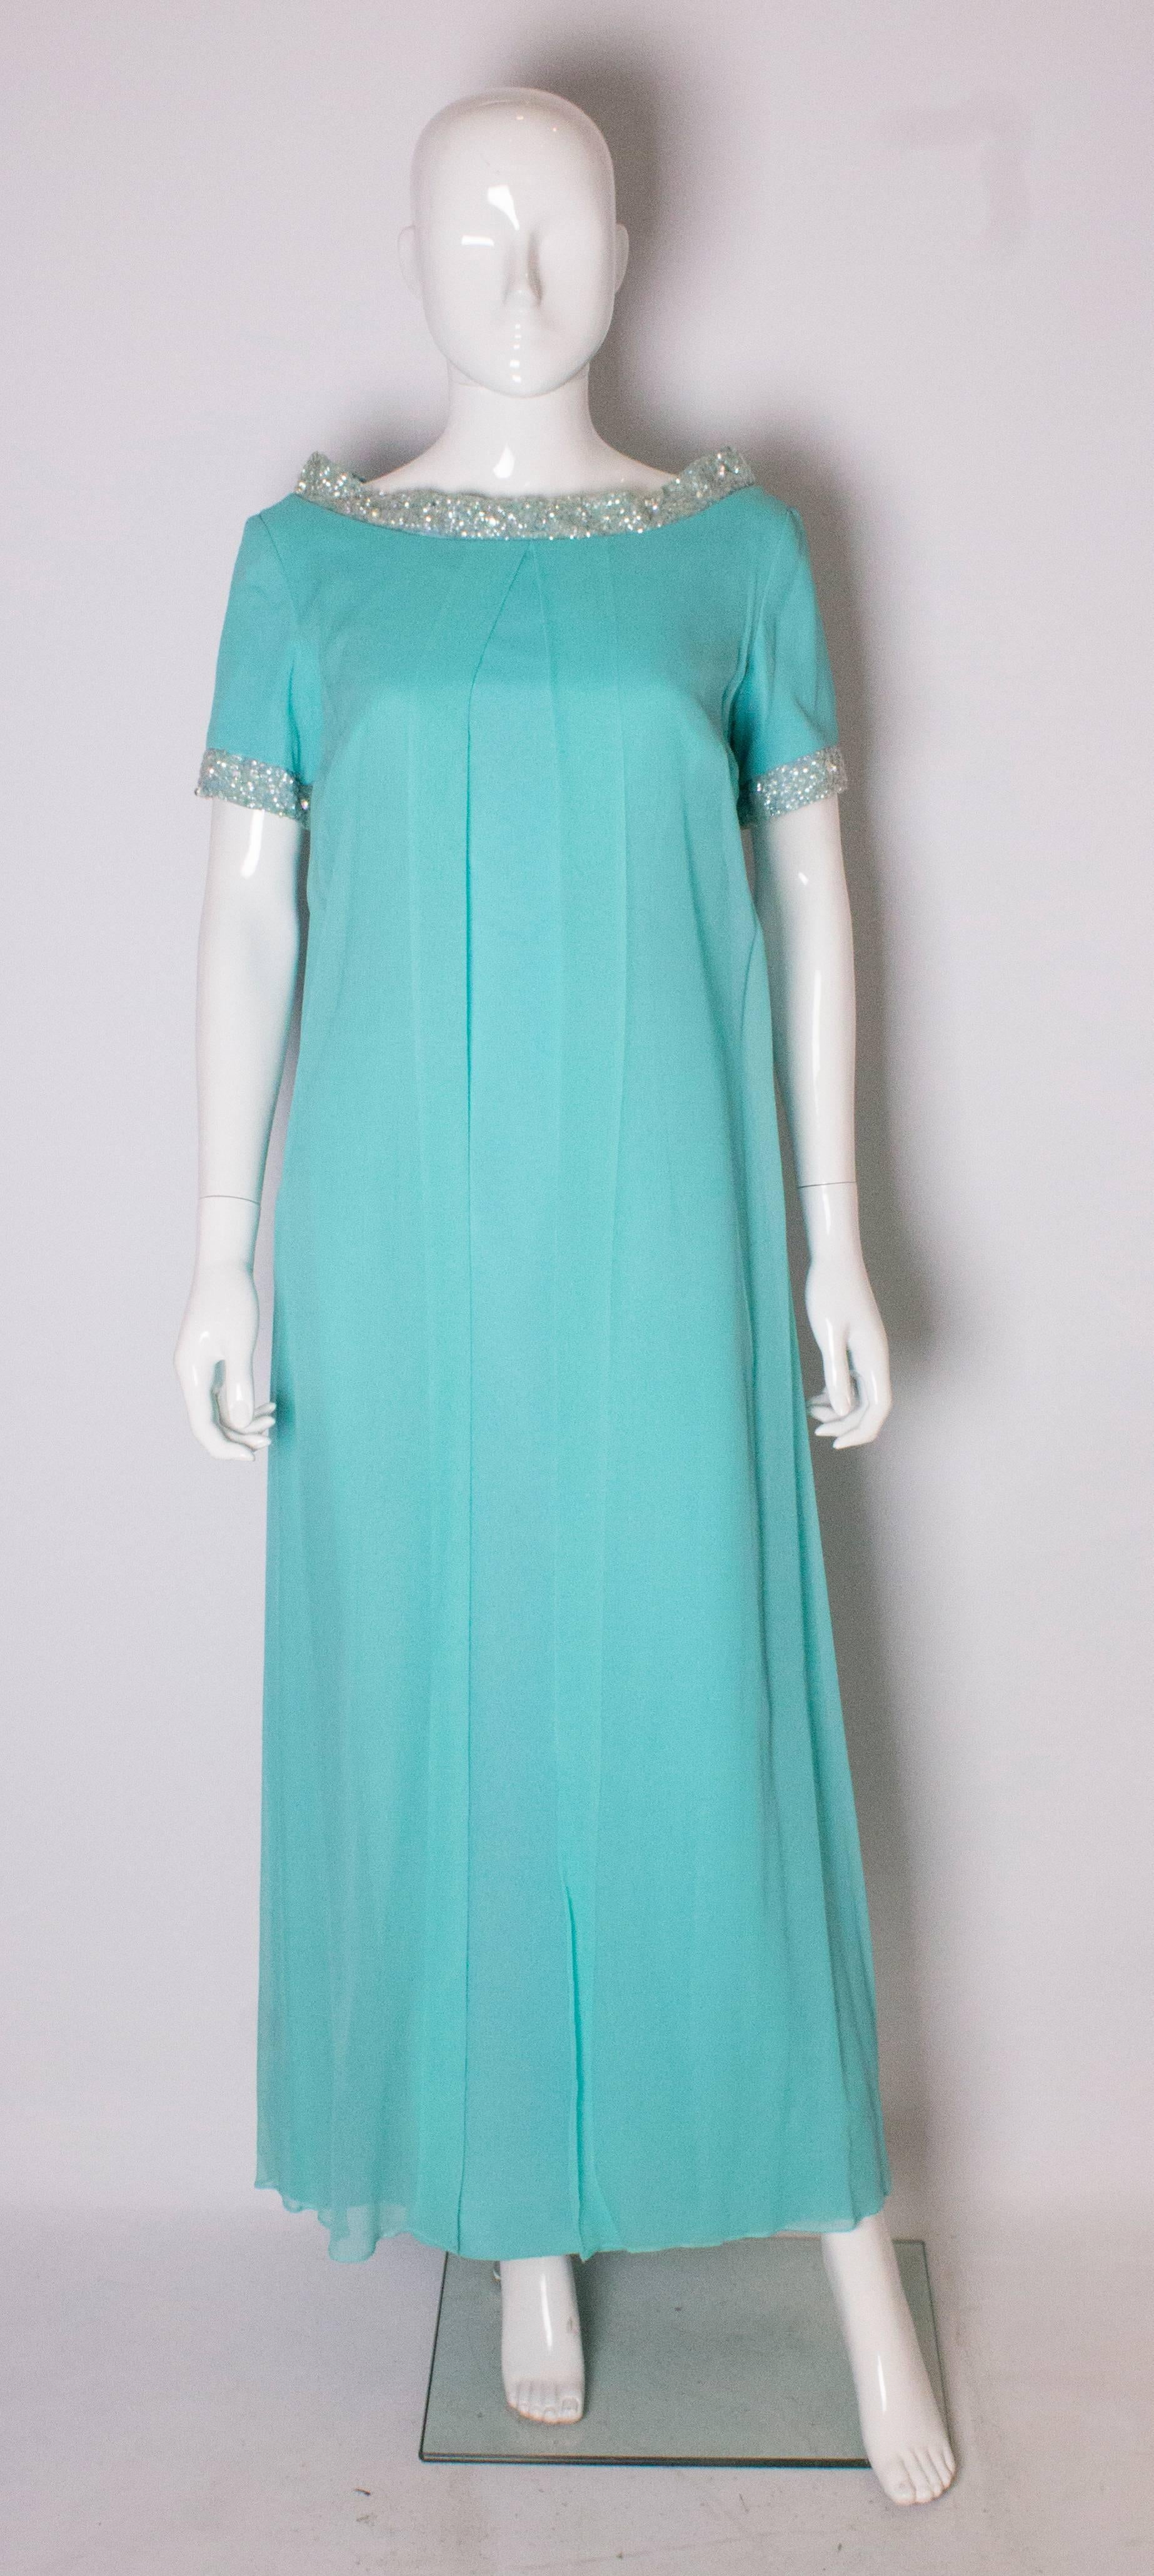 A wonderful vintage gown by Polmarks Model.  The gown has an attractive neckline with bead and sequin embellishment . The embellishment is also at the end of the sleave.The gown is column style wth a chiffon over layer.